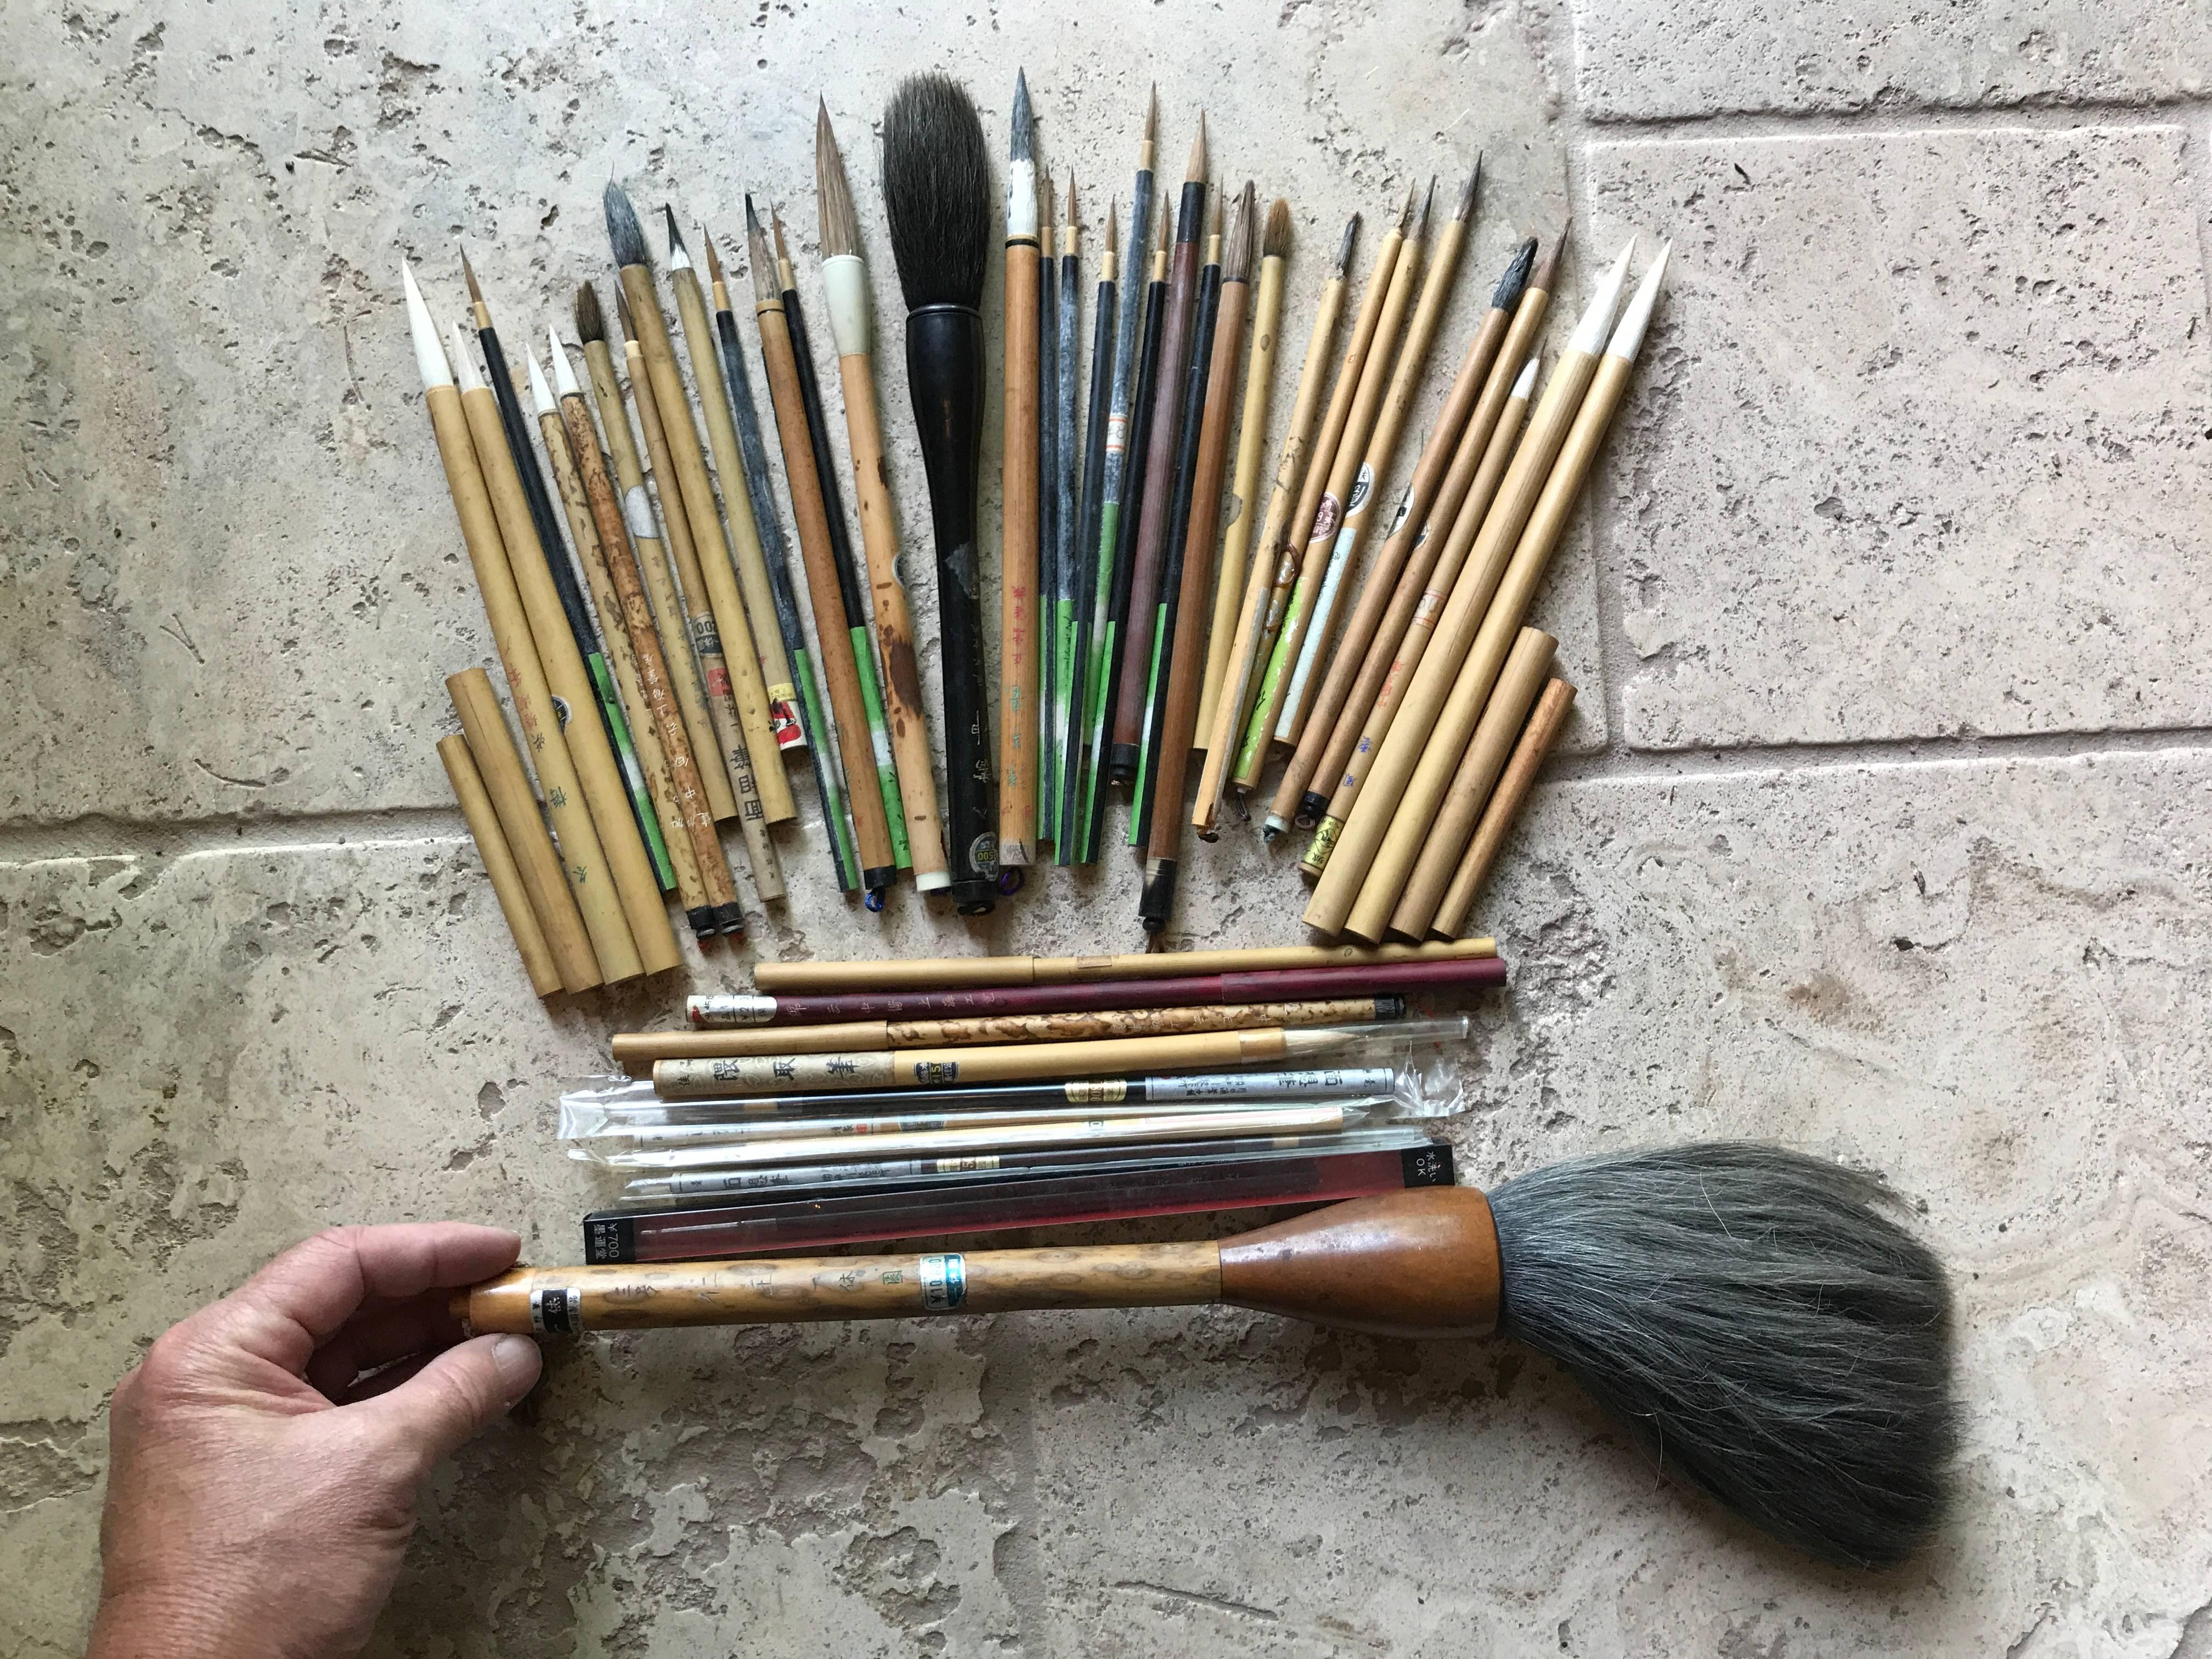 Here's a rare find from a collector we visited in Japan. A very unusual treasure from Japan. 

This is a cache of old and antique Japanese and Chinese bamboo paint and calligraphy artist brushes dating back to the 1940s. The bundle includes new